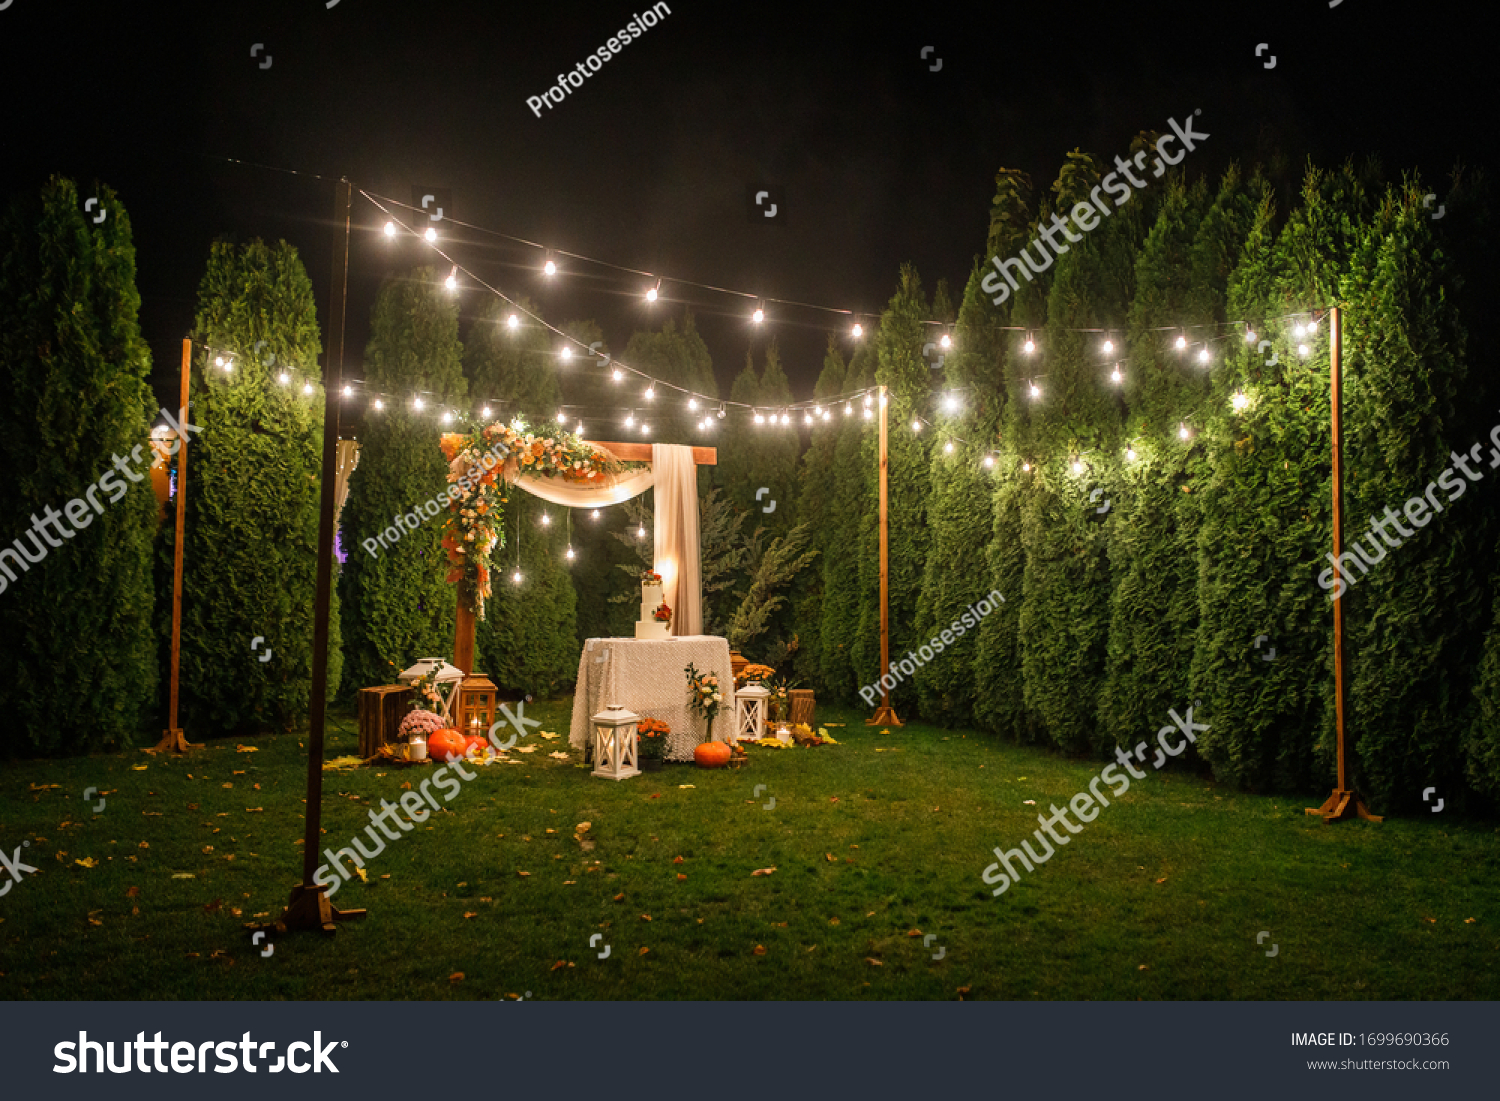 night wedding ceremony, the arch is decorated with flowers, candles and garlands of light bulbs and there is a wedding cake on the table #1699690366